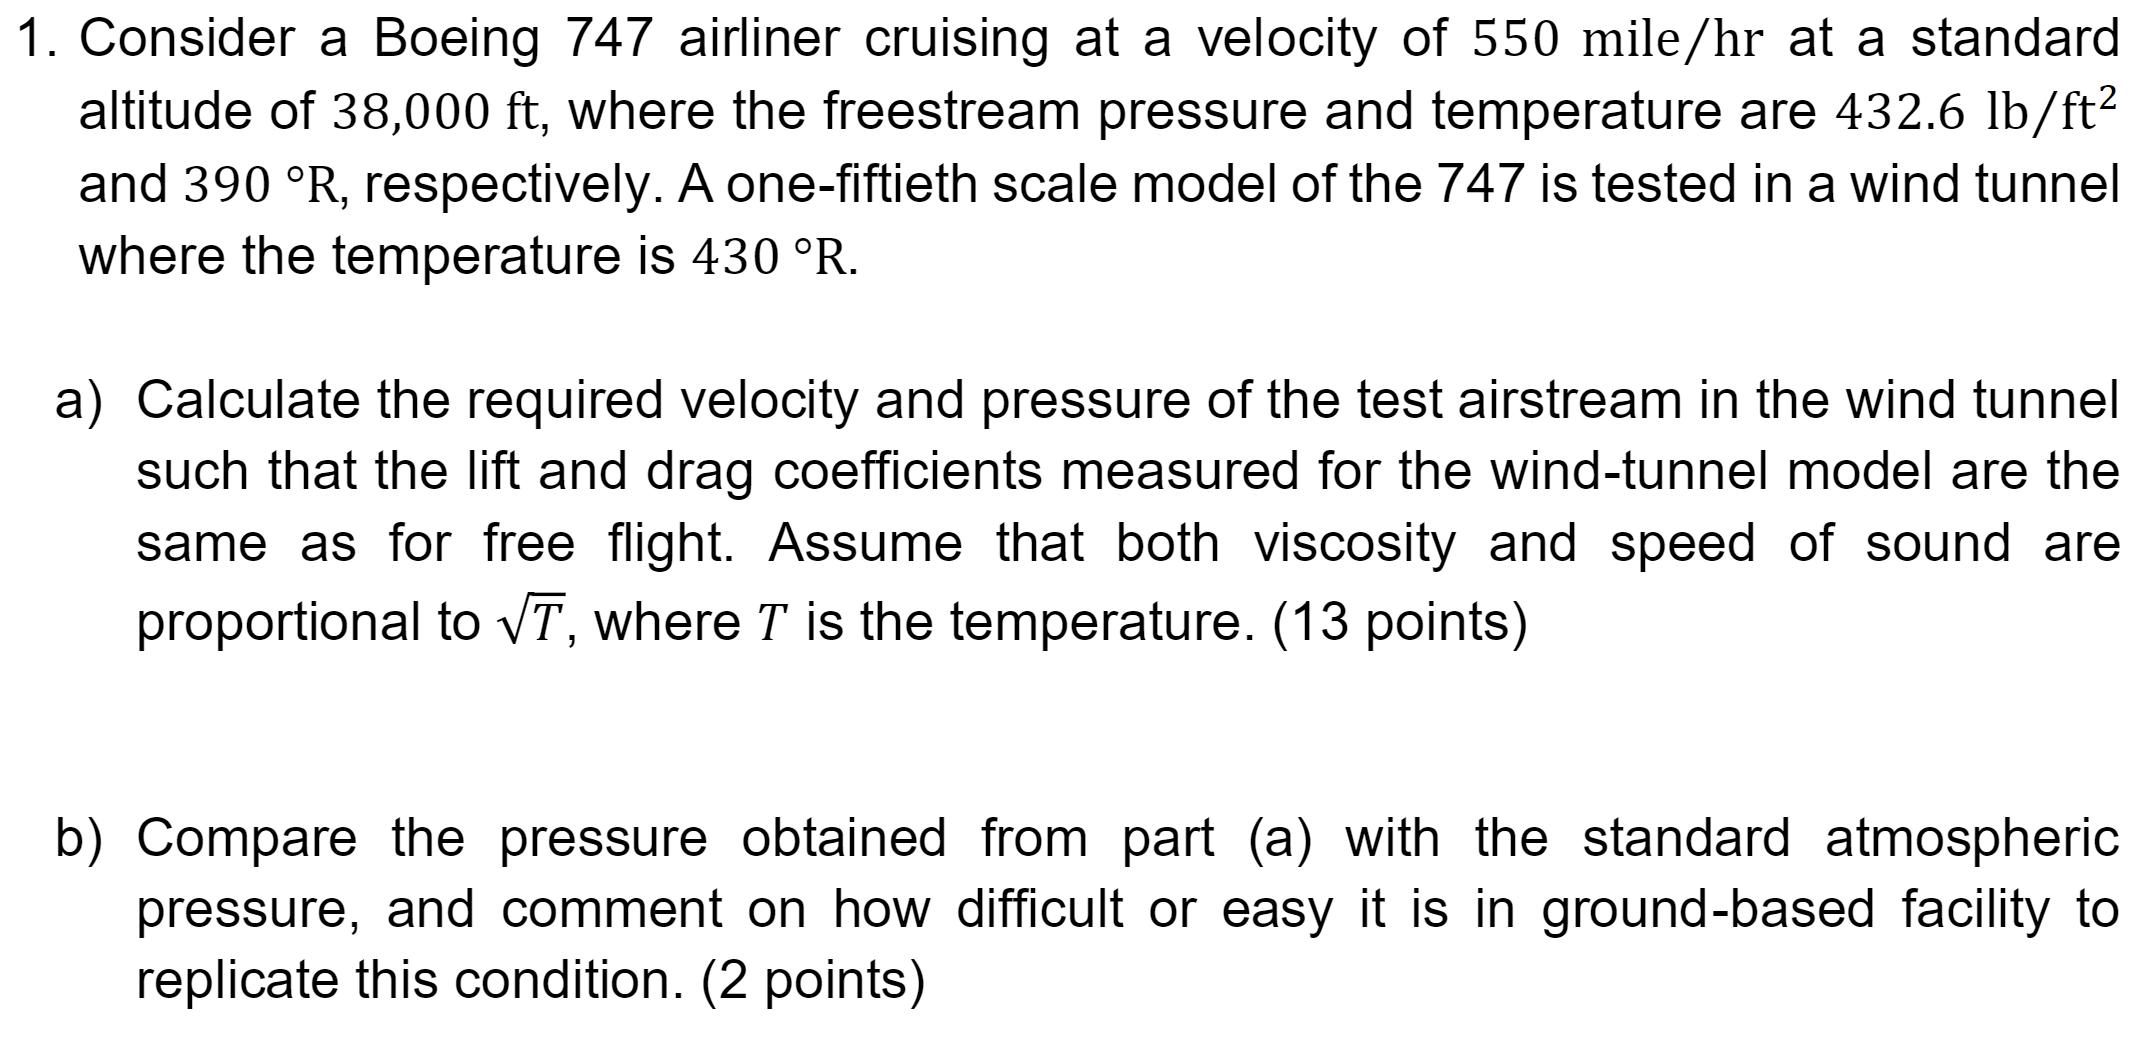 1. Consider a Boeing 747 airliner cruising at a velocity of 550 mile/hr at a standard altitude of 38,000 ft,